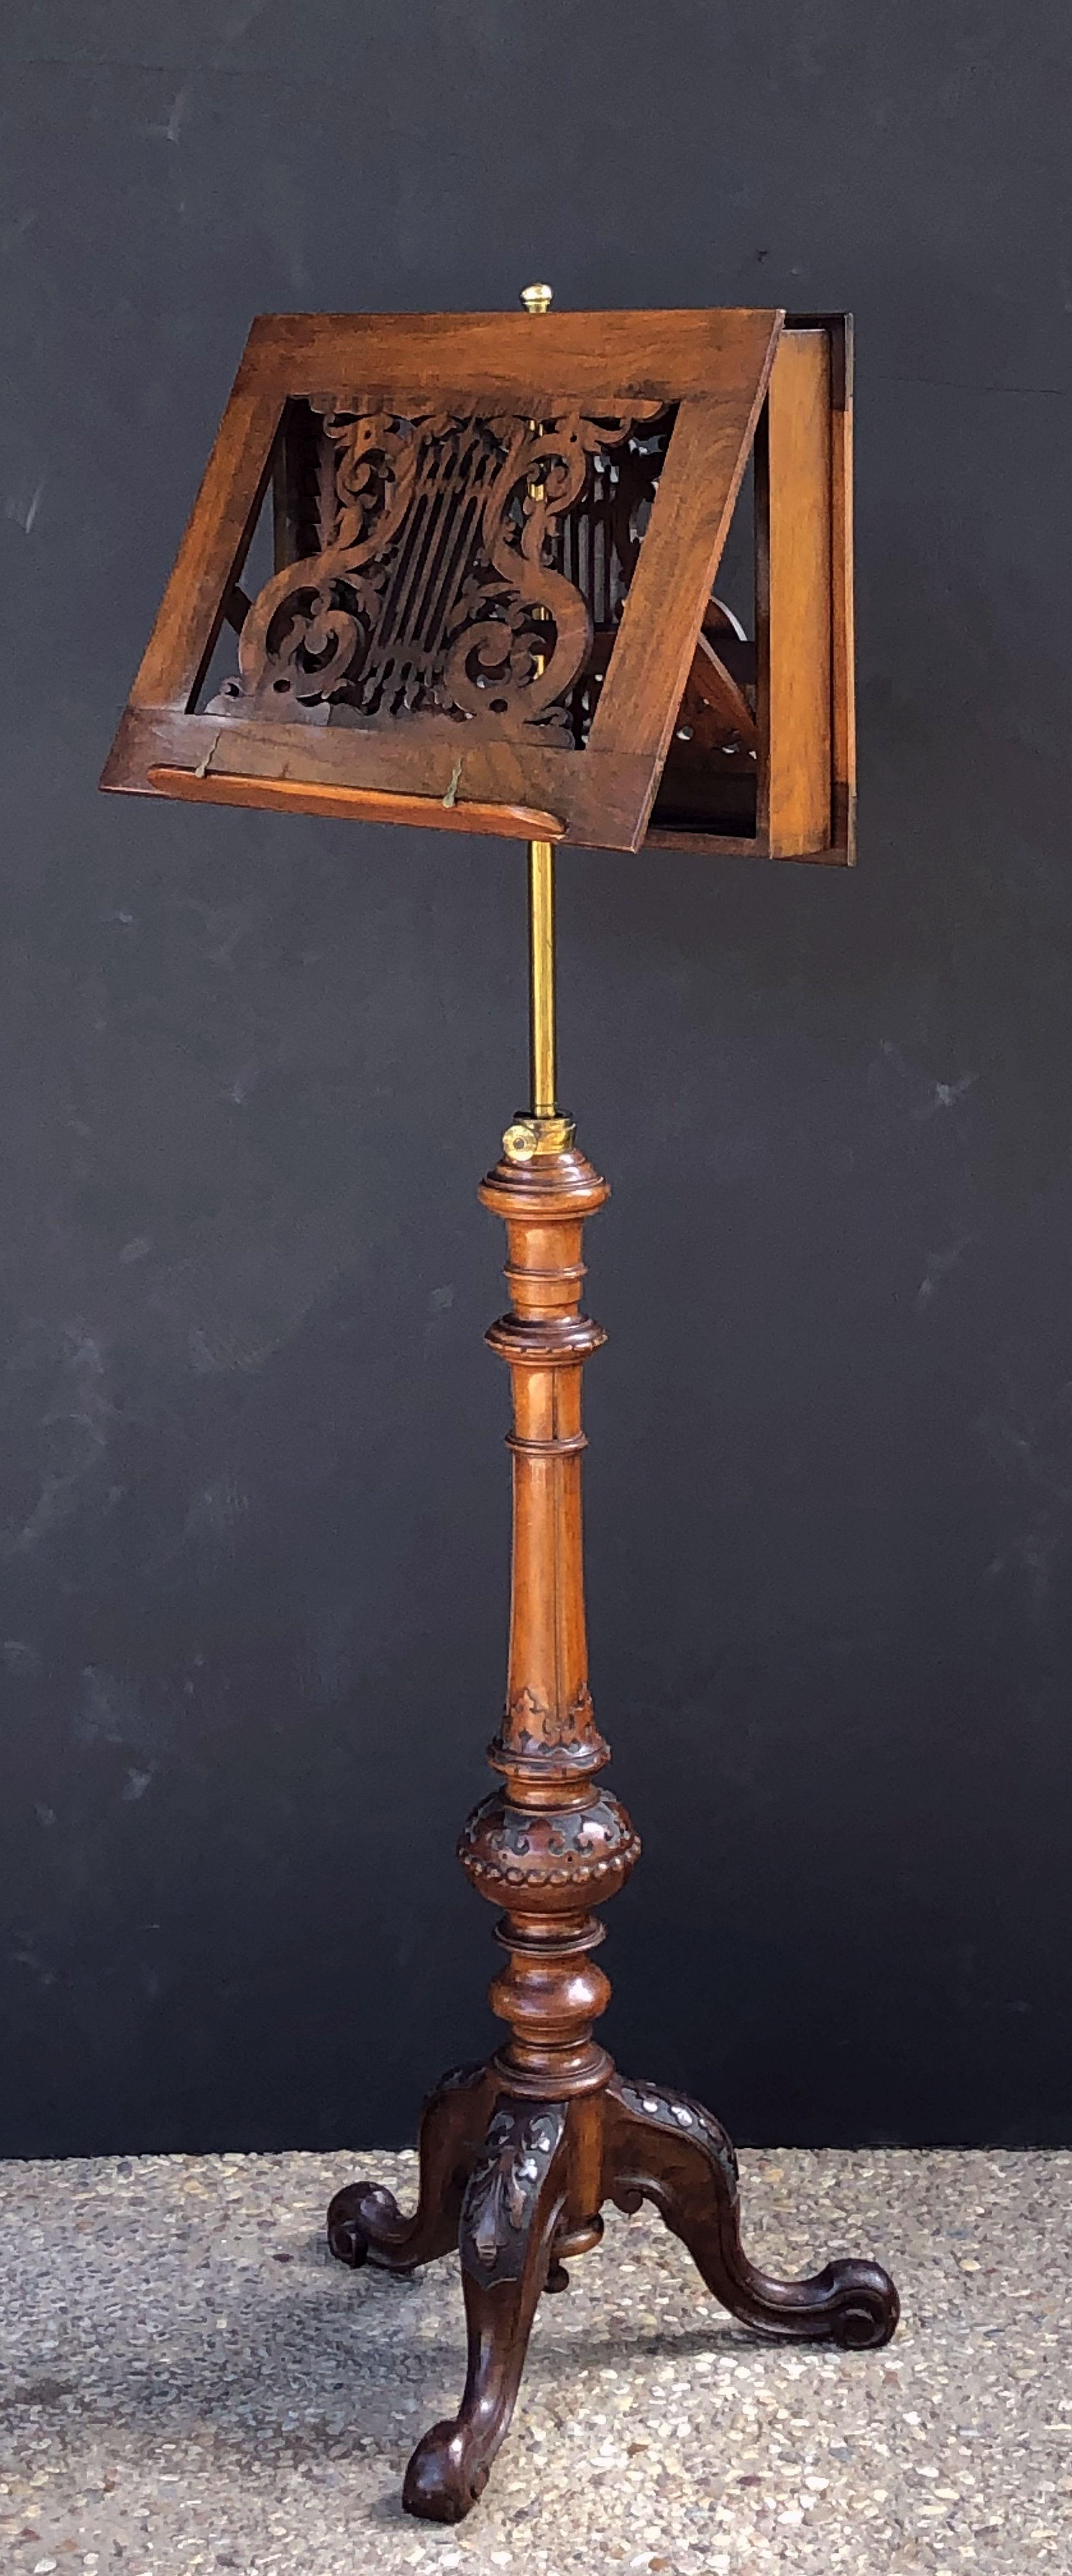 A handsome adjustable English duet (or two-sided) music stand of carved figured walnut, featuring a two sided stand with a lyre design attached to a brass rod, mounted to a tripod base with carved cabriole legs with an acanthus leaf design.